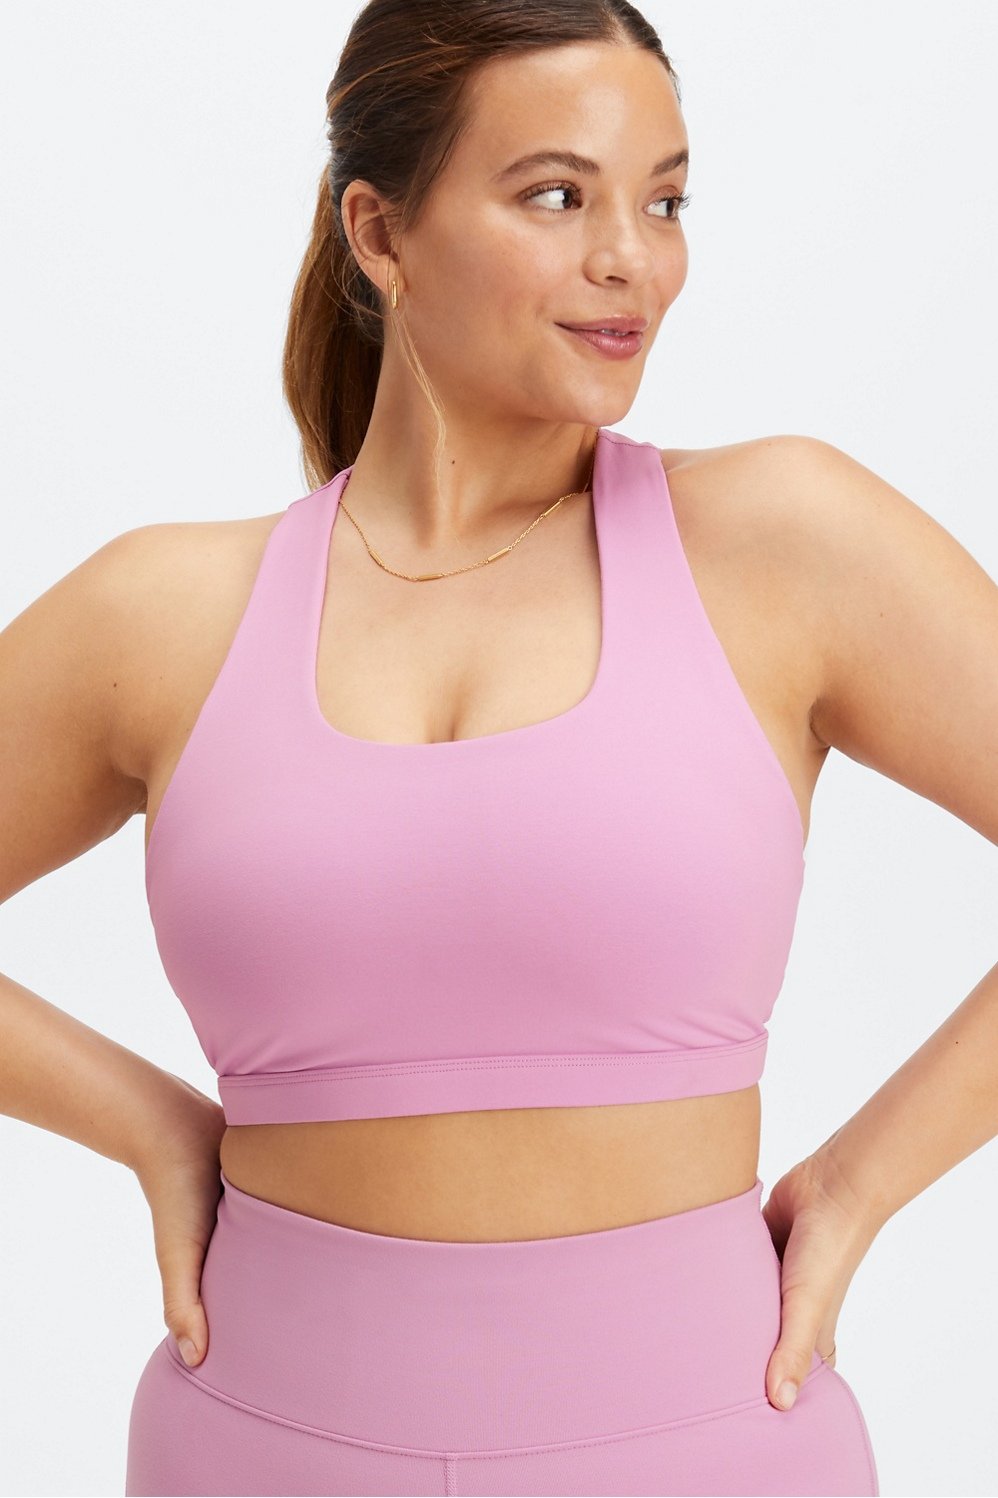 Activewear Review: Zyia Bare Primo Mesh Sports Bra #1709 